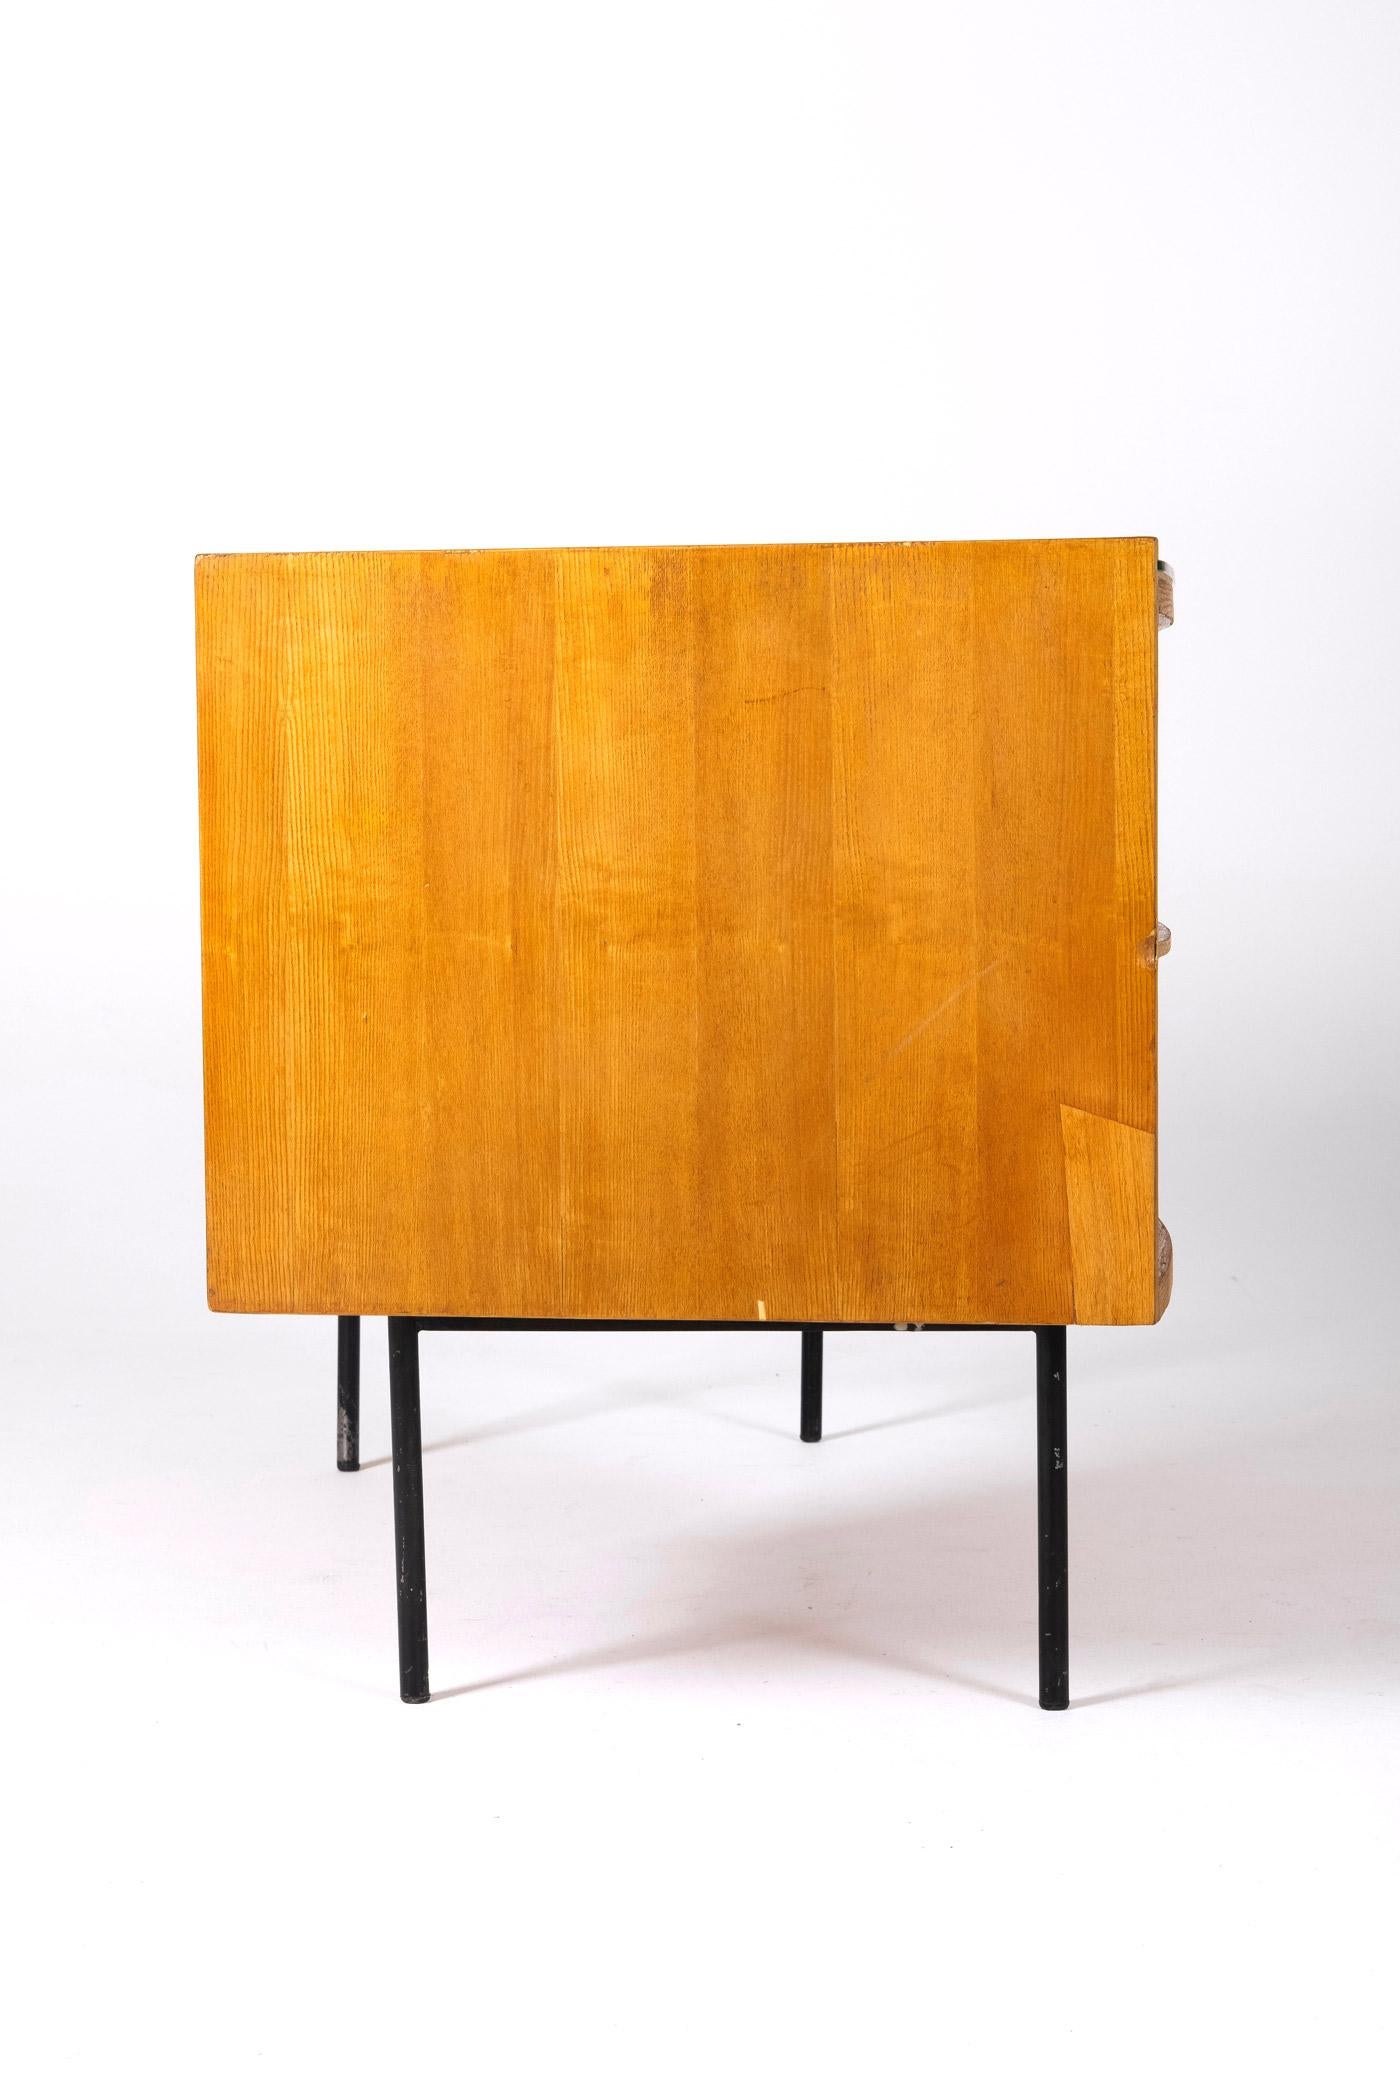 Wood and glass desk by Jean René Picard, 1960s 3